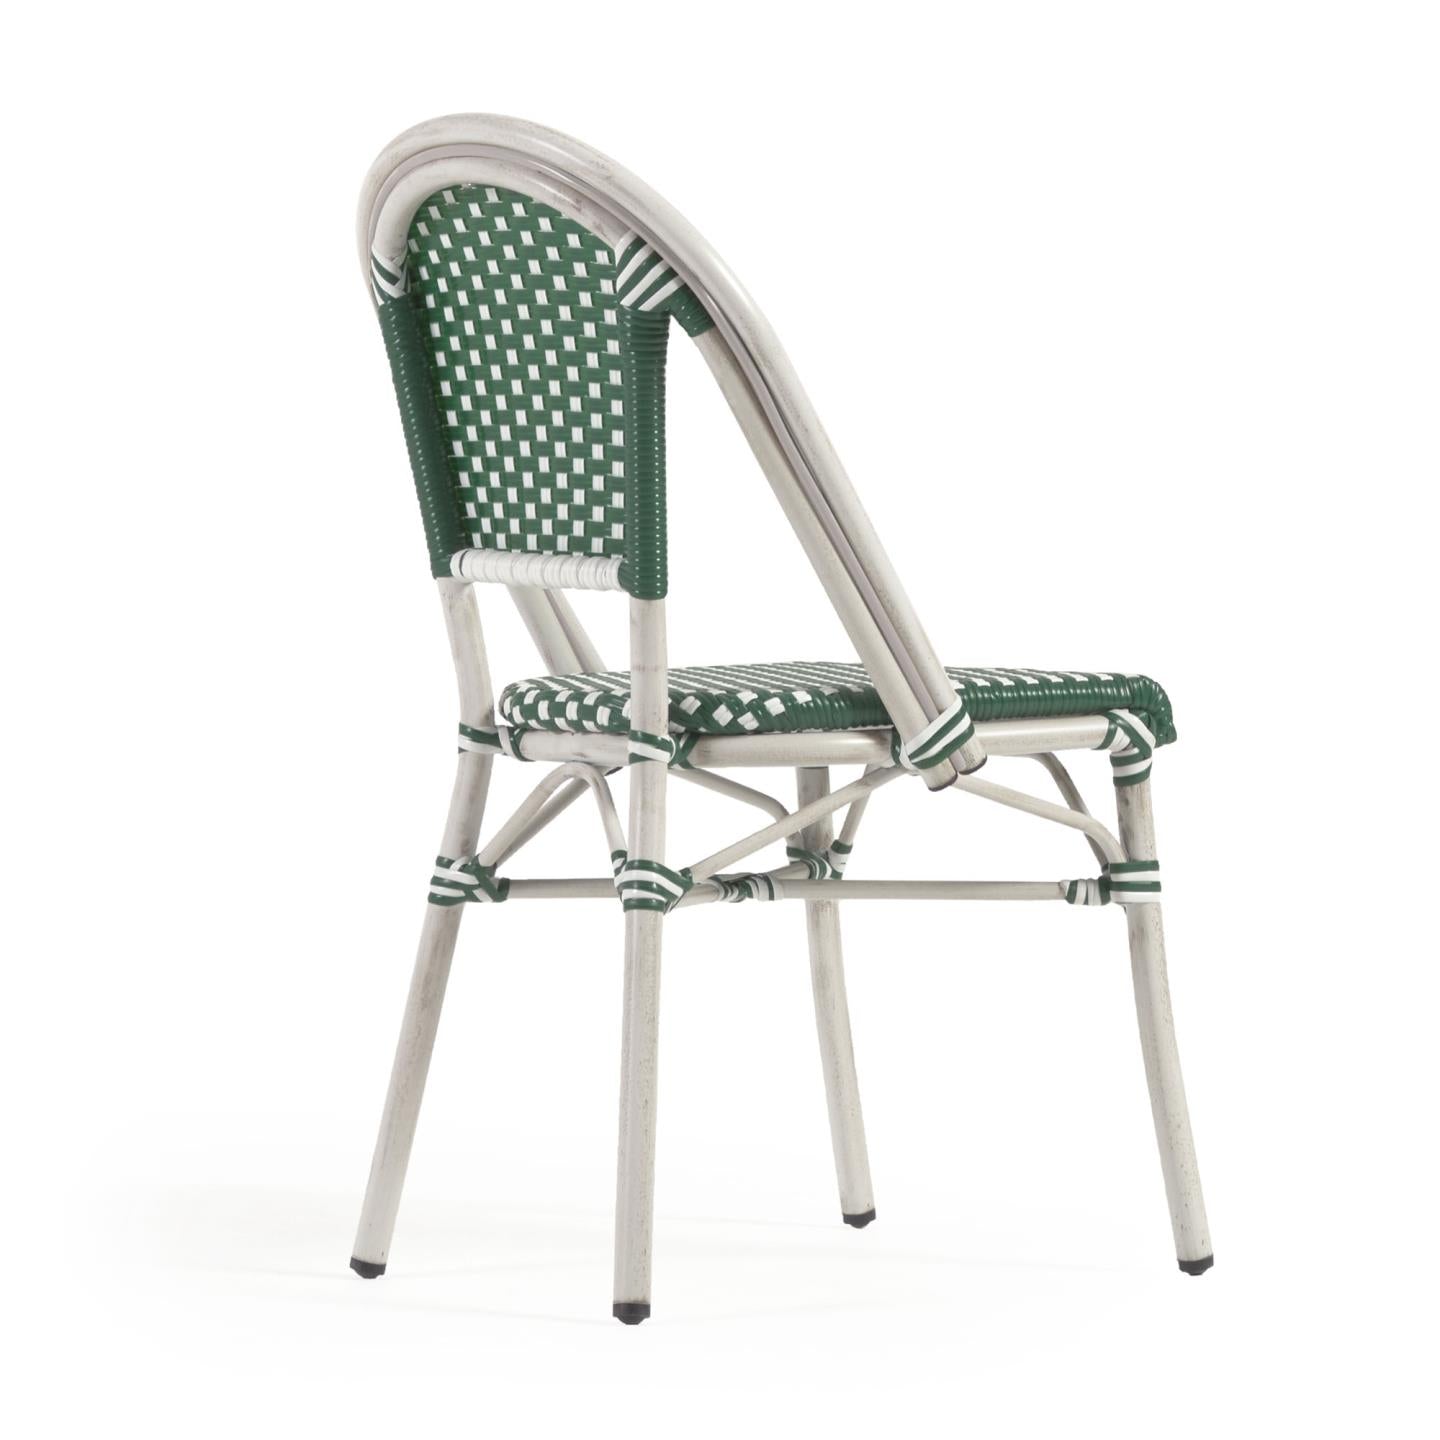 Marilyn stackable outdoor bistro chair in aluminium and synthetic rattan, green & white